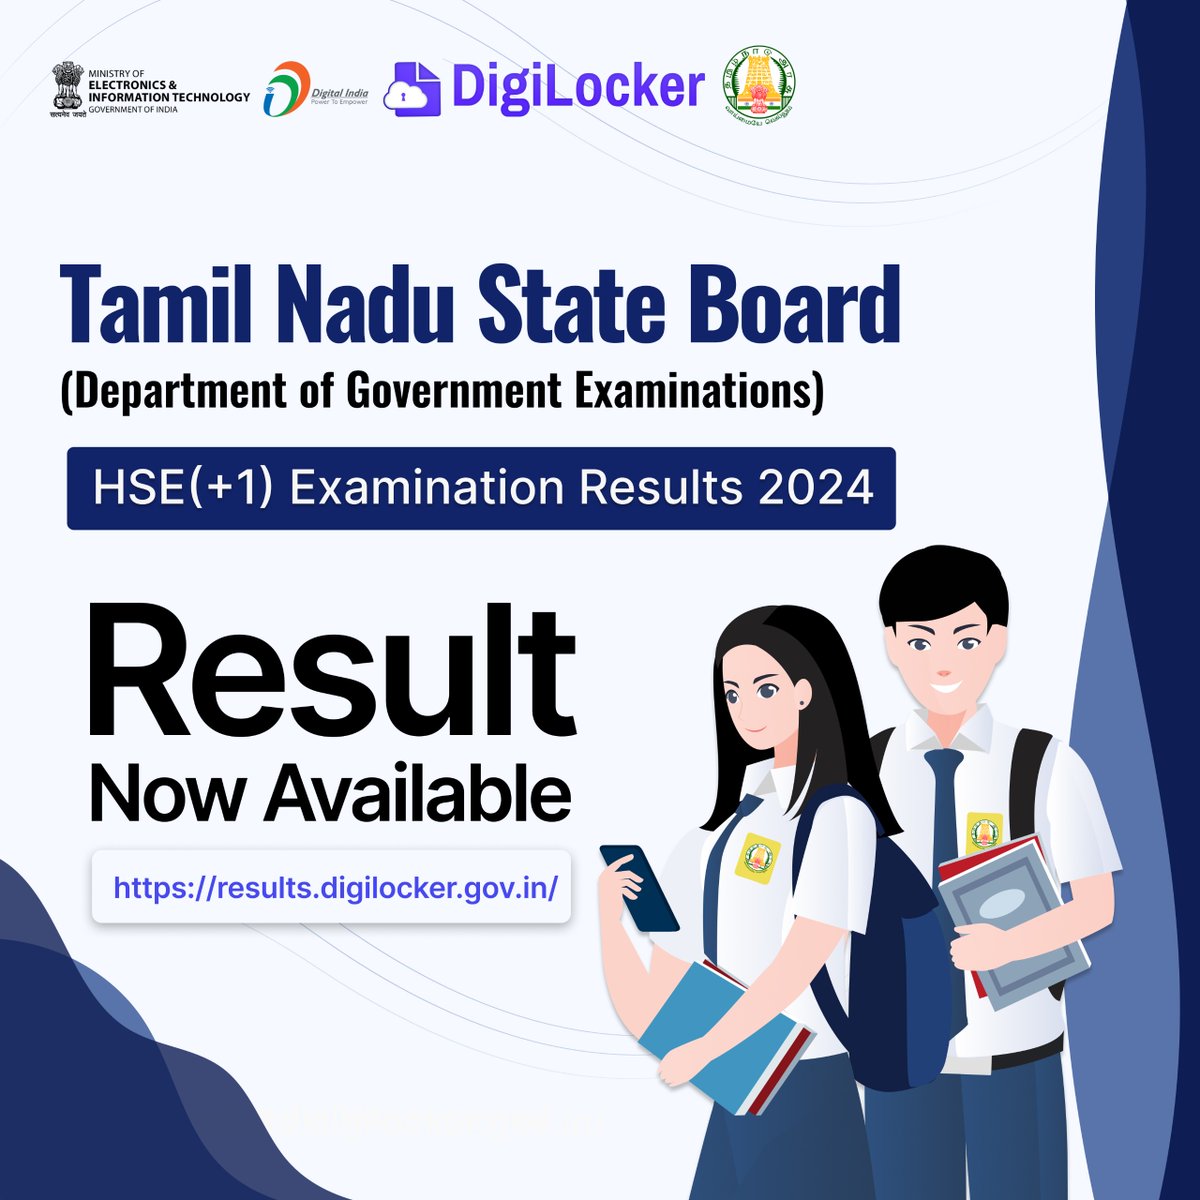 Tamil Nadu State Board (Department of Government Examinations) HSE(+1) Examination Results 2024 are now accessible on the #DigiLocker #Result Page. Visit: results.digilocker.gov.in Congratulations to all the students on their achievements! #TamilNadu